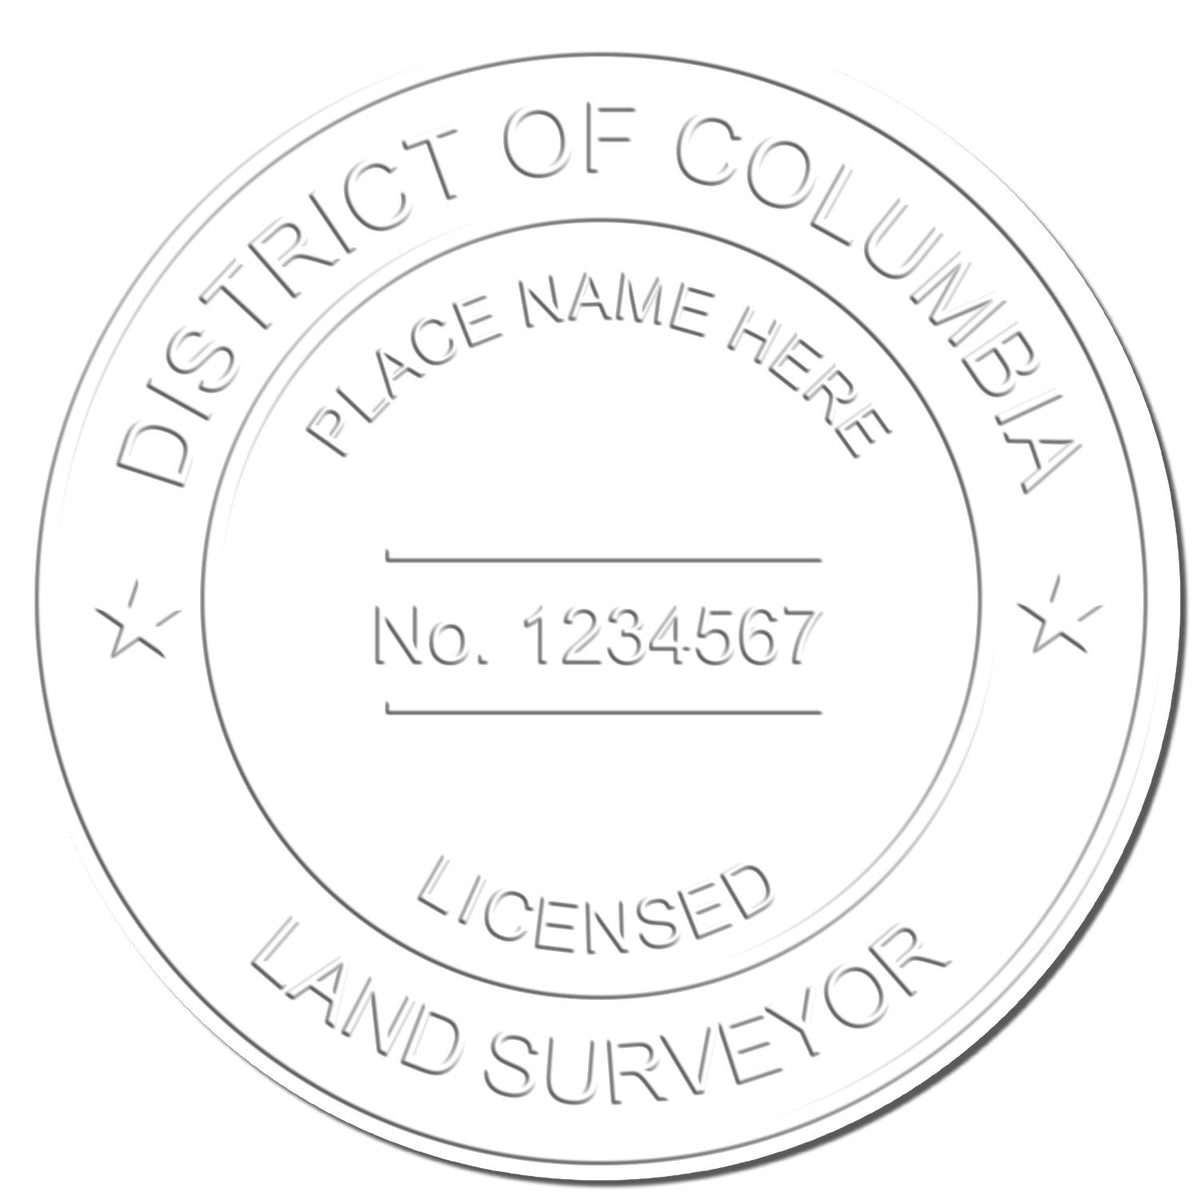 This paper is stamped with a sample imprint of the Extended Long Reach District of Columbia Surveyor Embosser, signifying its quality and reliability.